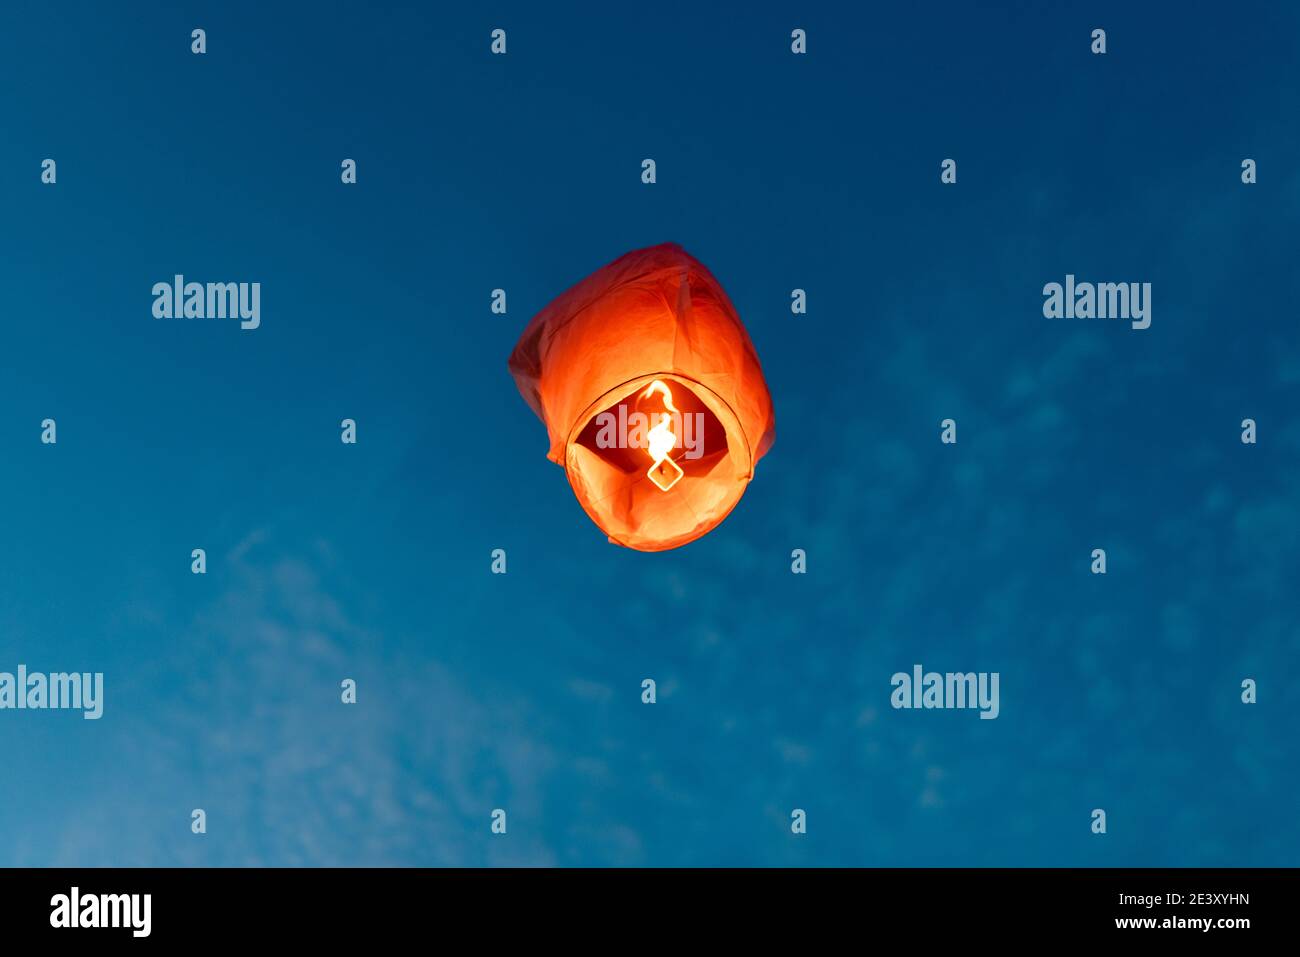 chinese lanterns launched into the air Stock Photo